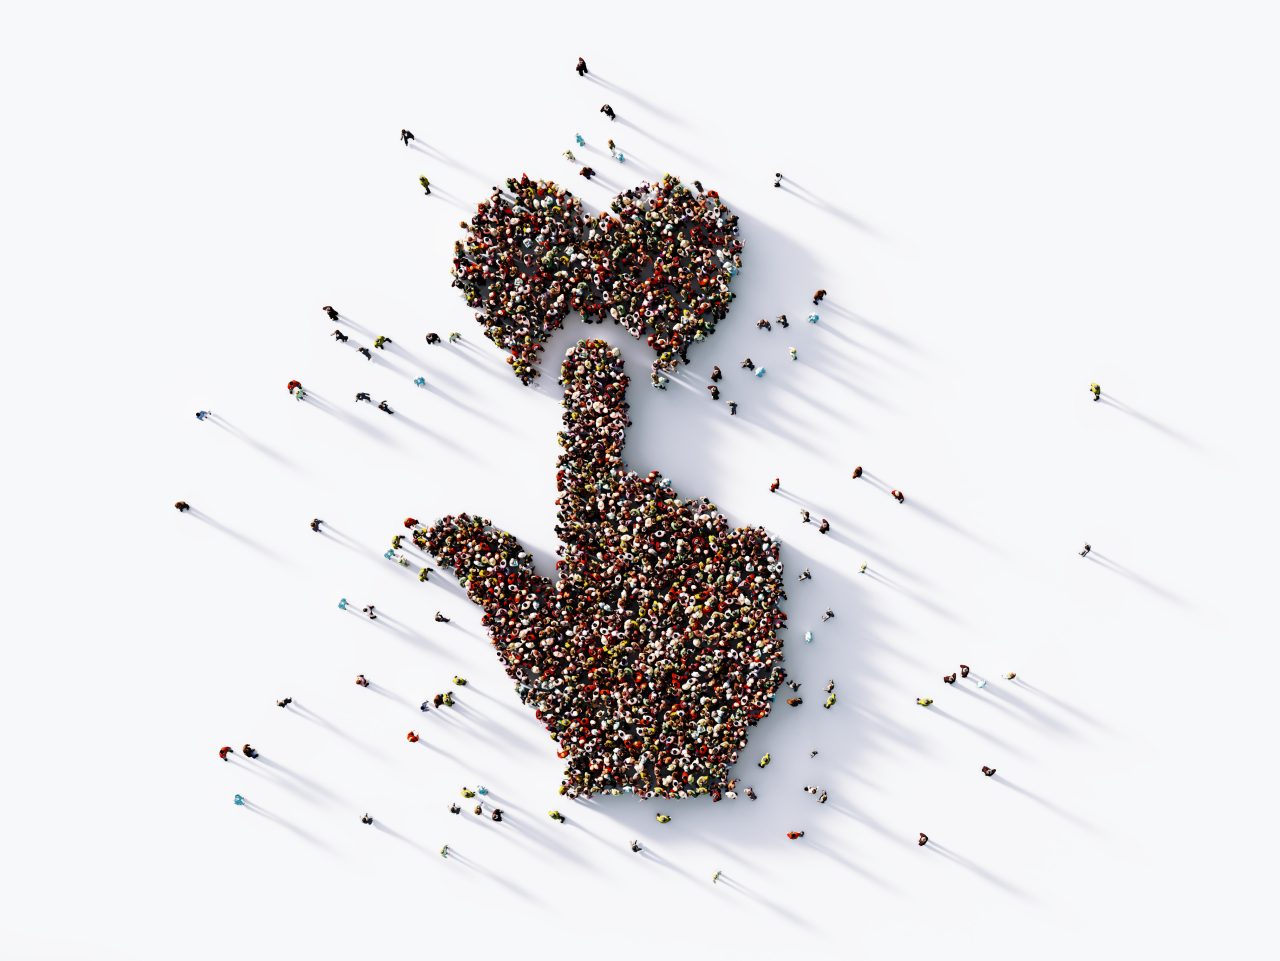 Crowd of people forming a donation symbol on white background